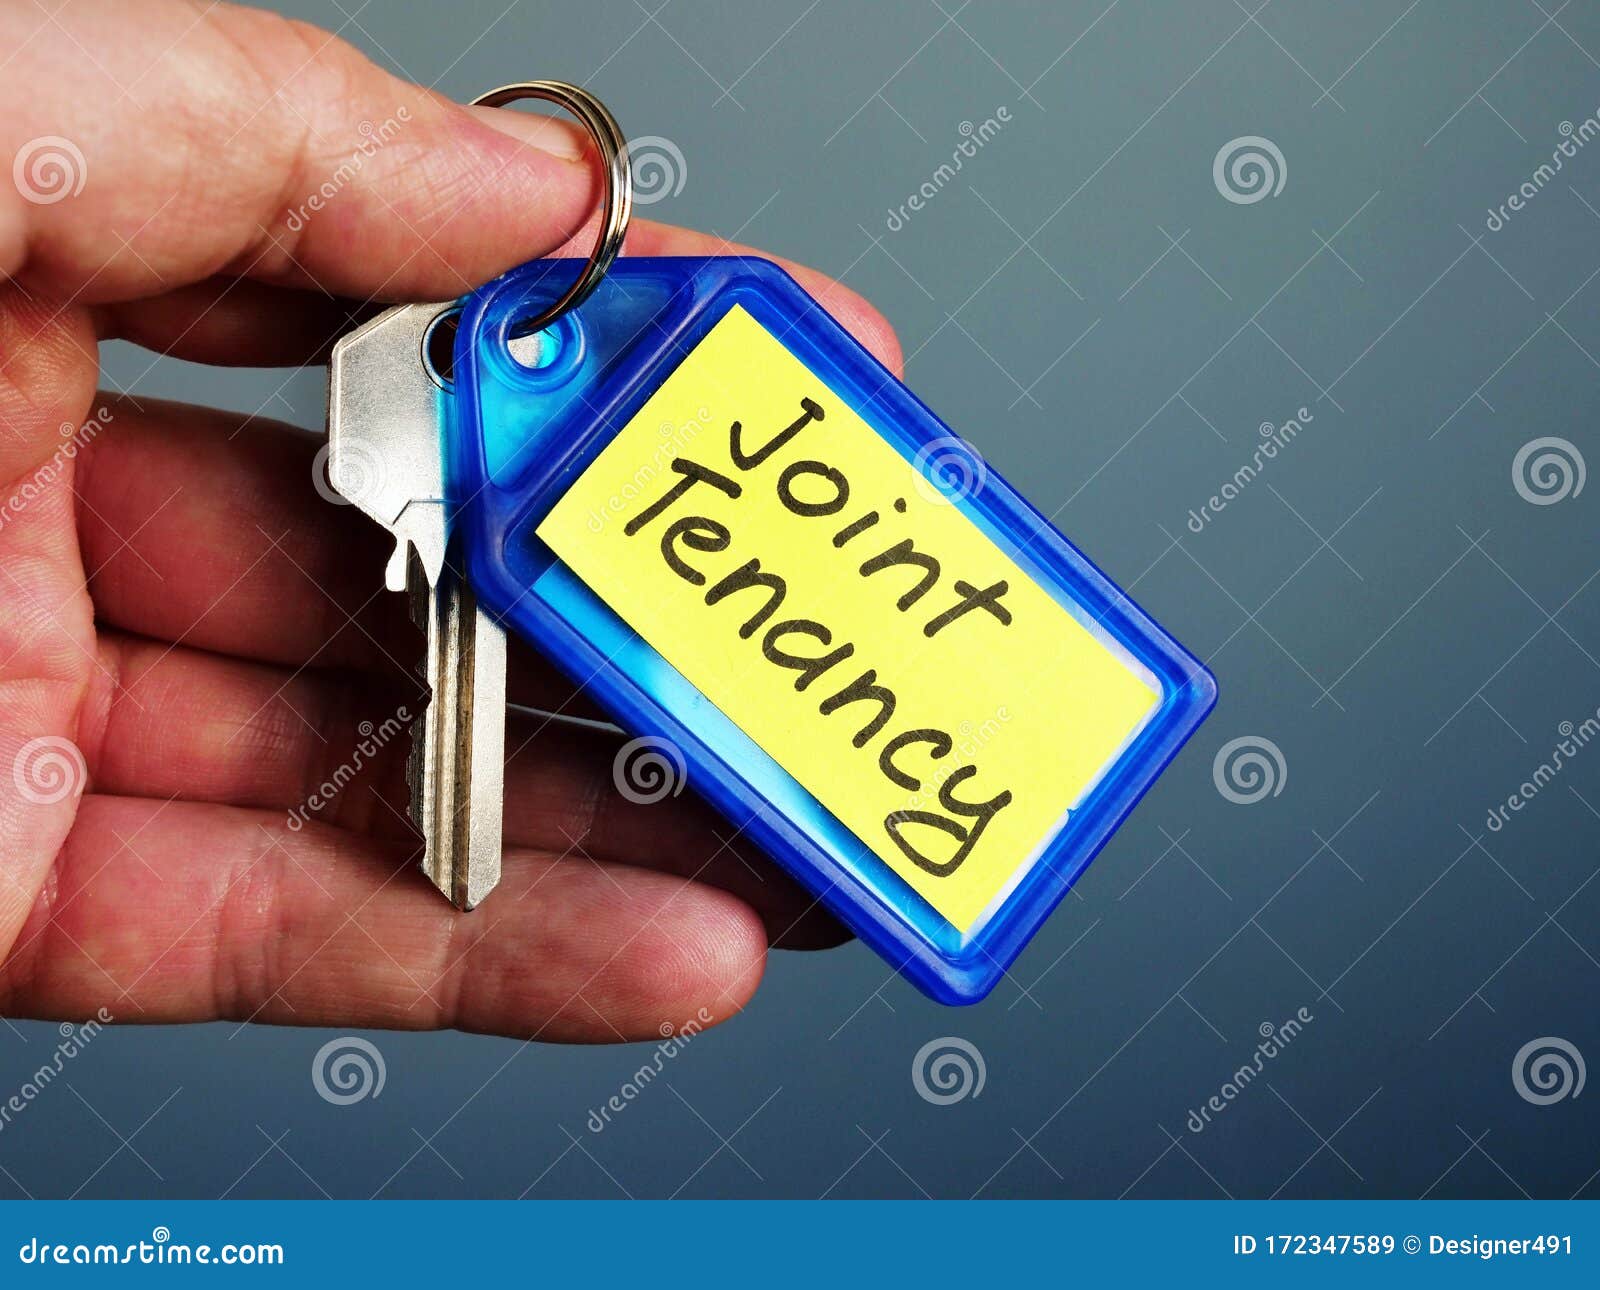 hand holds key with joint tenancy inscription